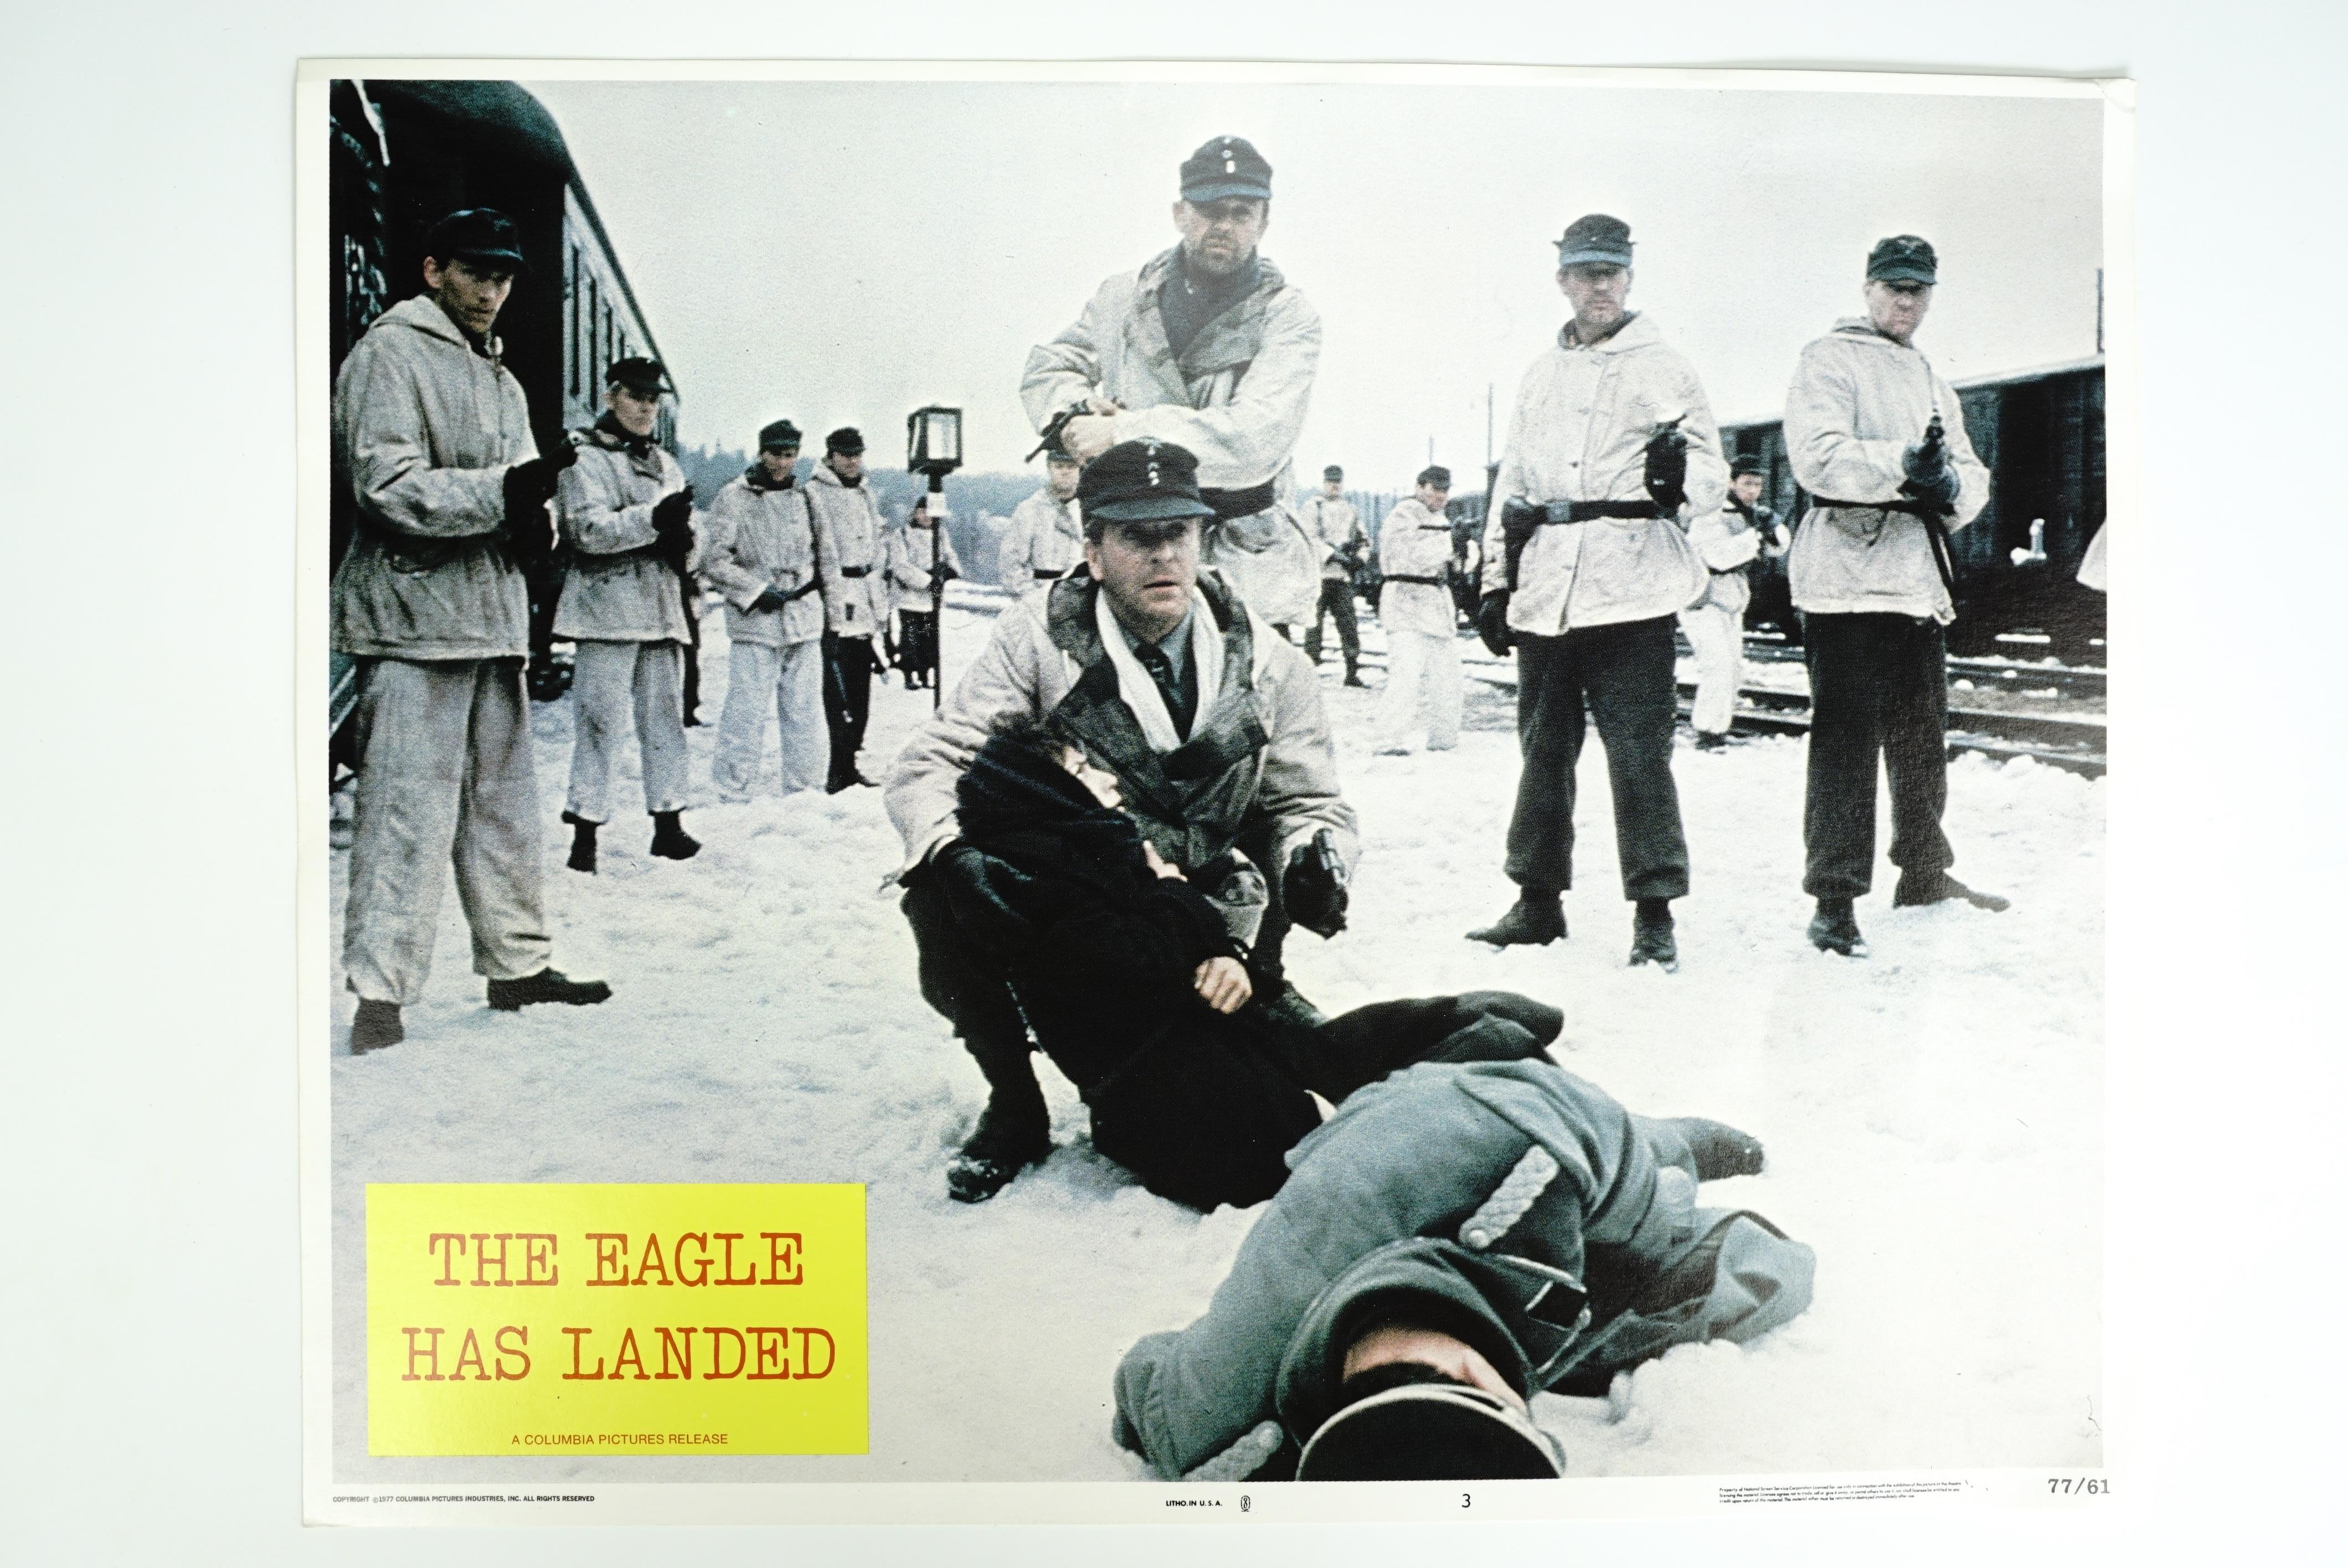 A 1977 lobby card for the film "The Eagle Has Landed", Columbia Pictures, 77/61, 28 cm x 36 cm